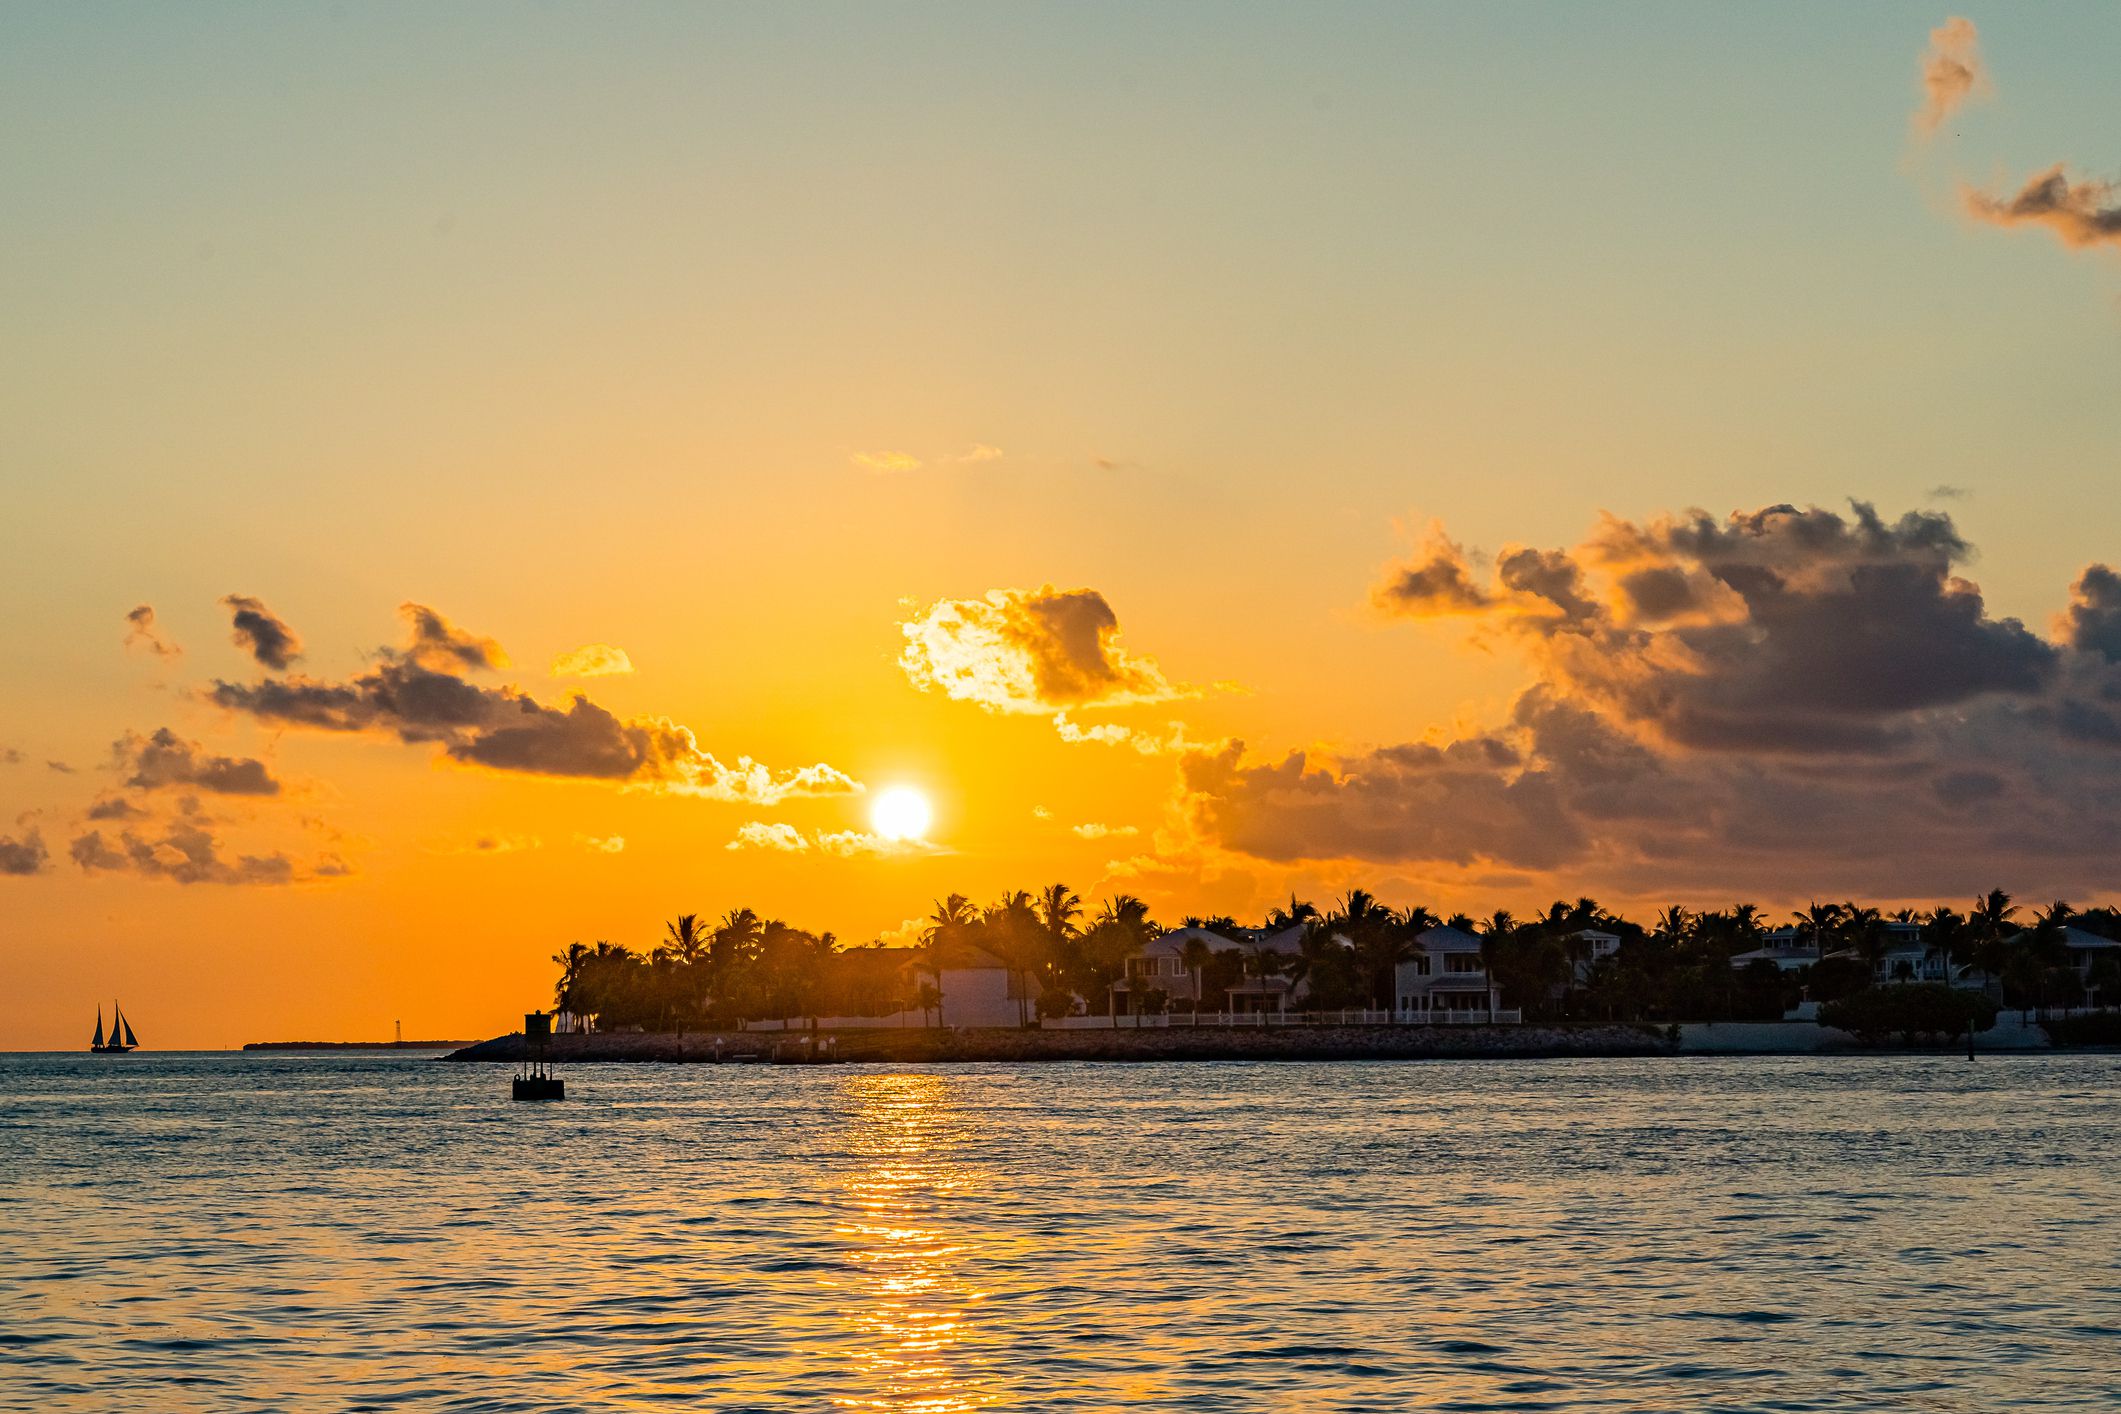 <p><b> Average Star Review:</b> 4.487</p><p>Mallory Square in Key West is the ultimate sunset celebration spot. Every evening, crowds gather for the <a href="https://www.trolleytours.com/key-west/mallory-square-sunset#:~:text=Mallory%20Square%20Sunset%20Celebration&text=Located%20at%20the%20center%20of,the%20world%20famous%20sunset%20celebration.">famous Sunset Celebration</a>, featuring street performers, local artisans, and food vendors. As the sun sets over the Gulf of Mexico, the sky lights up in brilliant hues, creating a festive and vibrant atmosphere.</p>